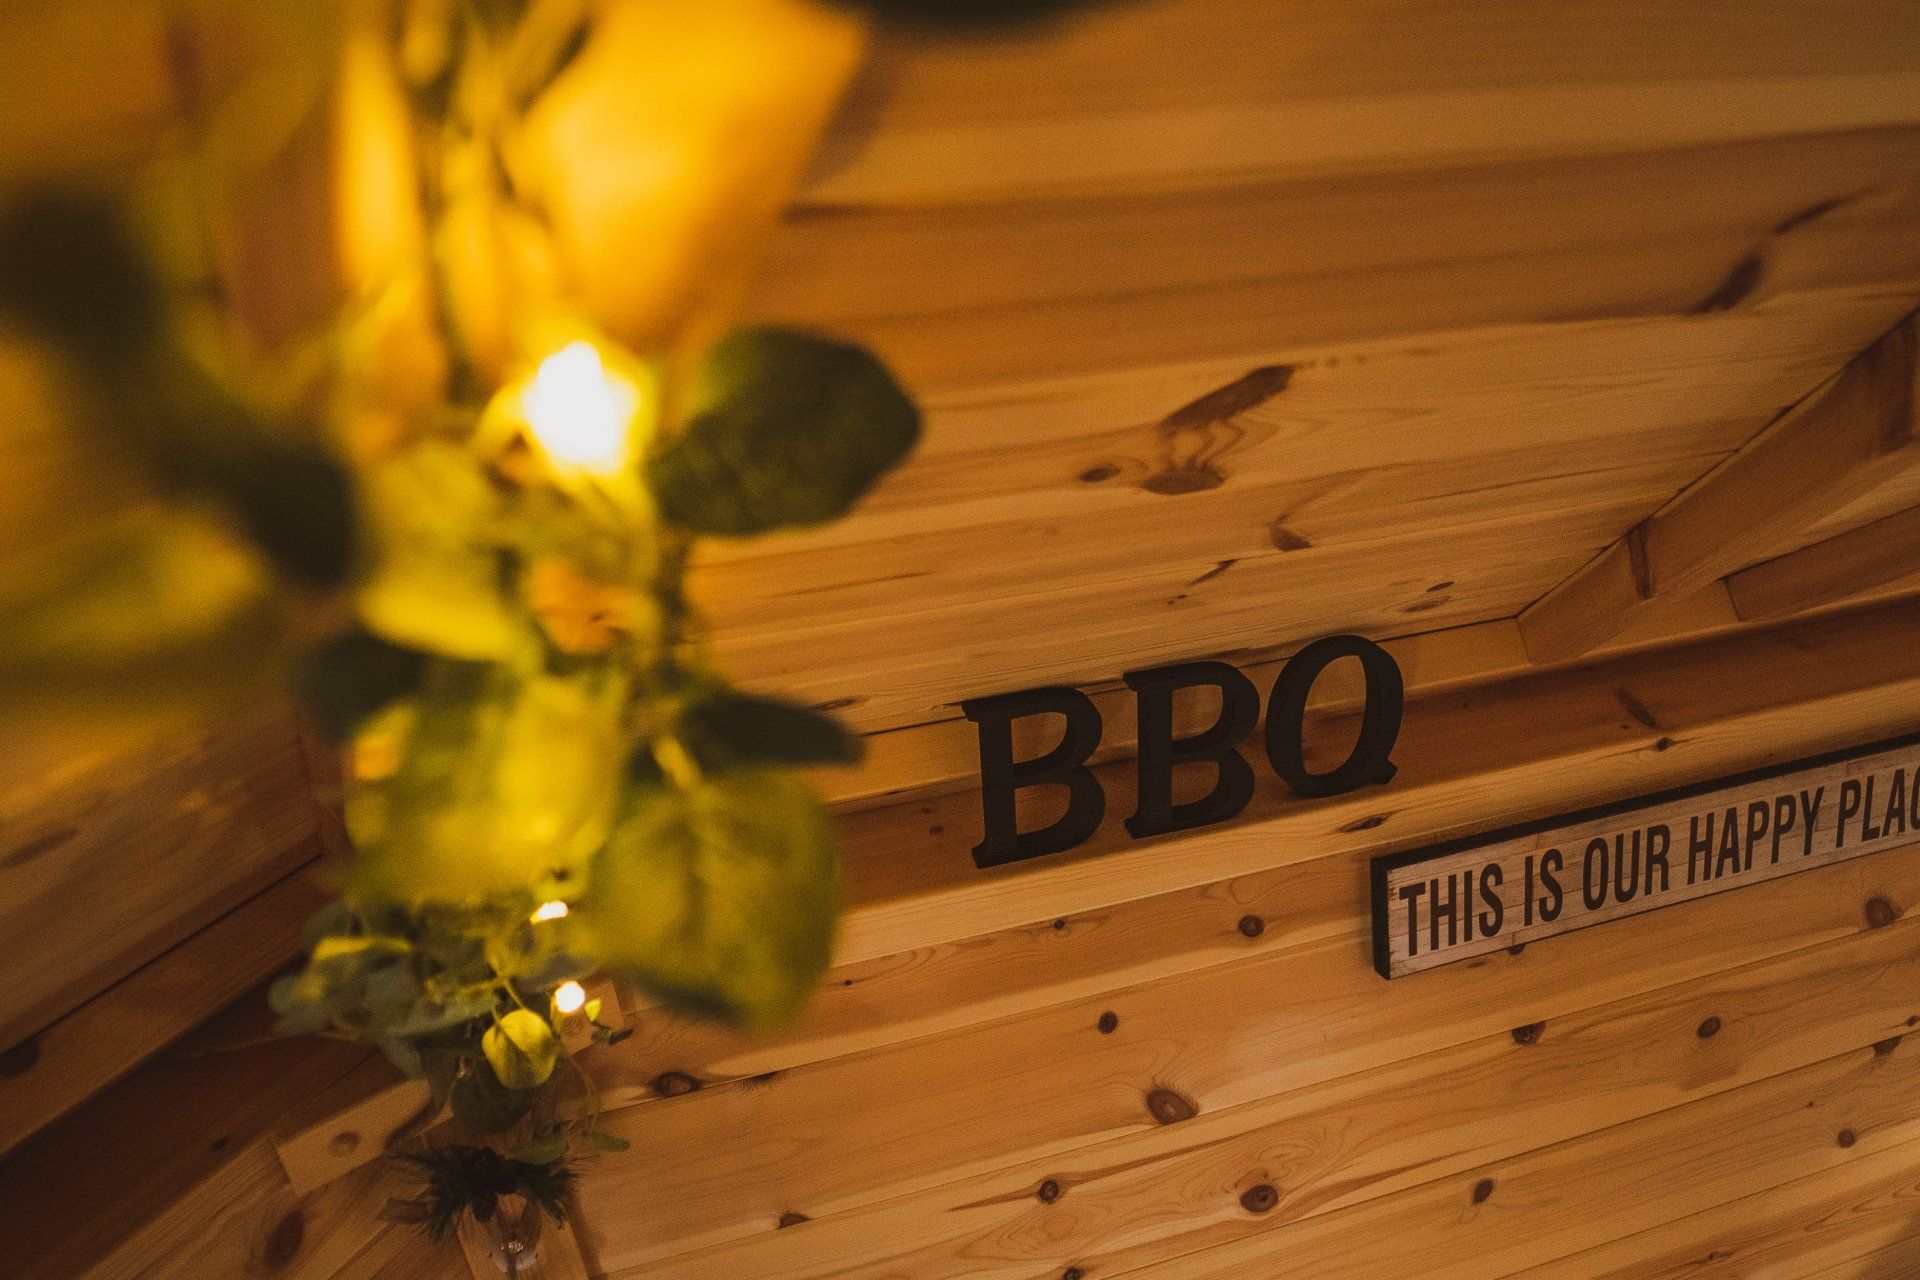 BBQ hut decorated to embrace hygge